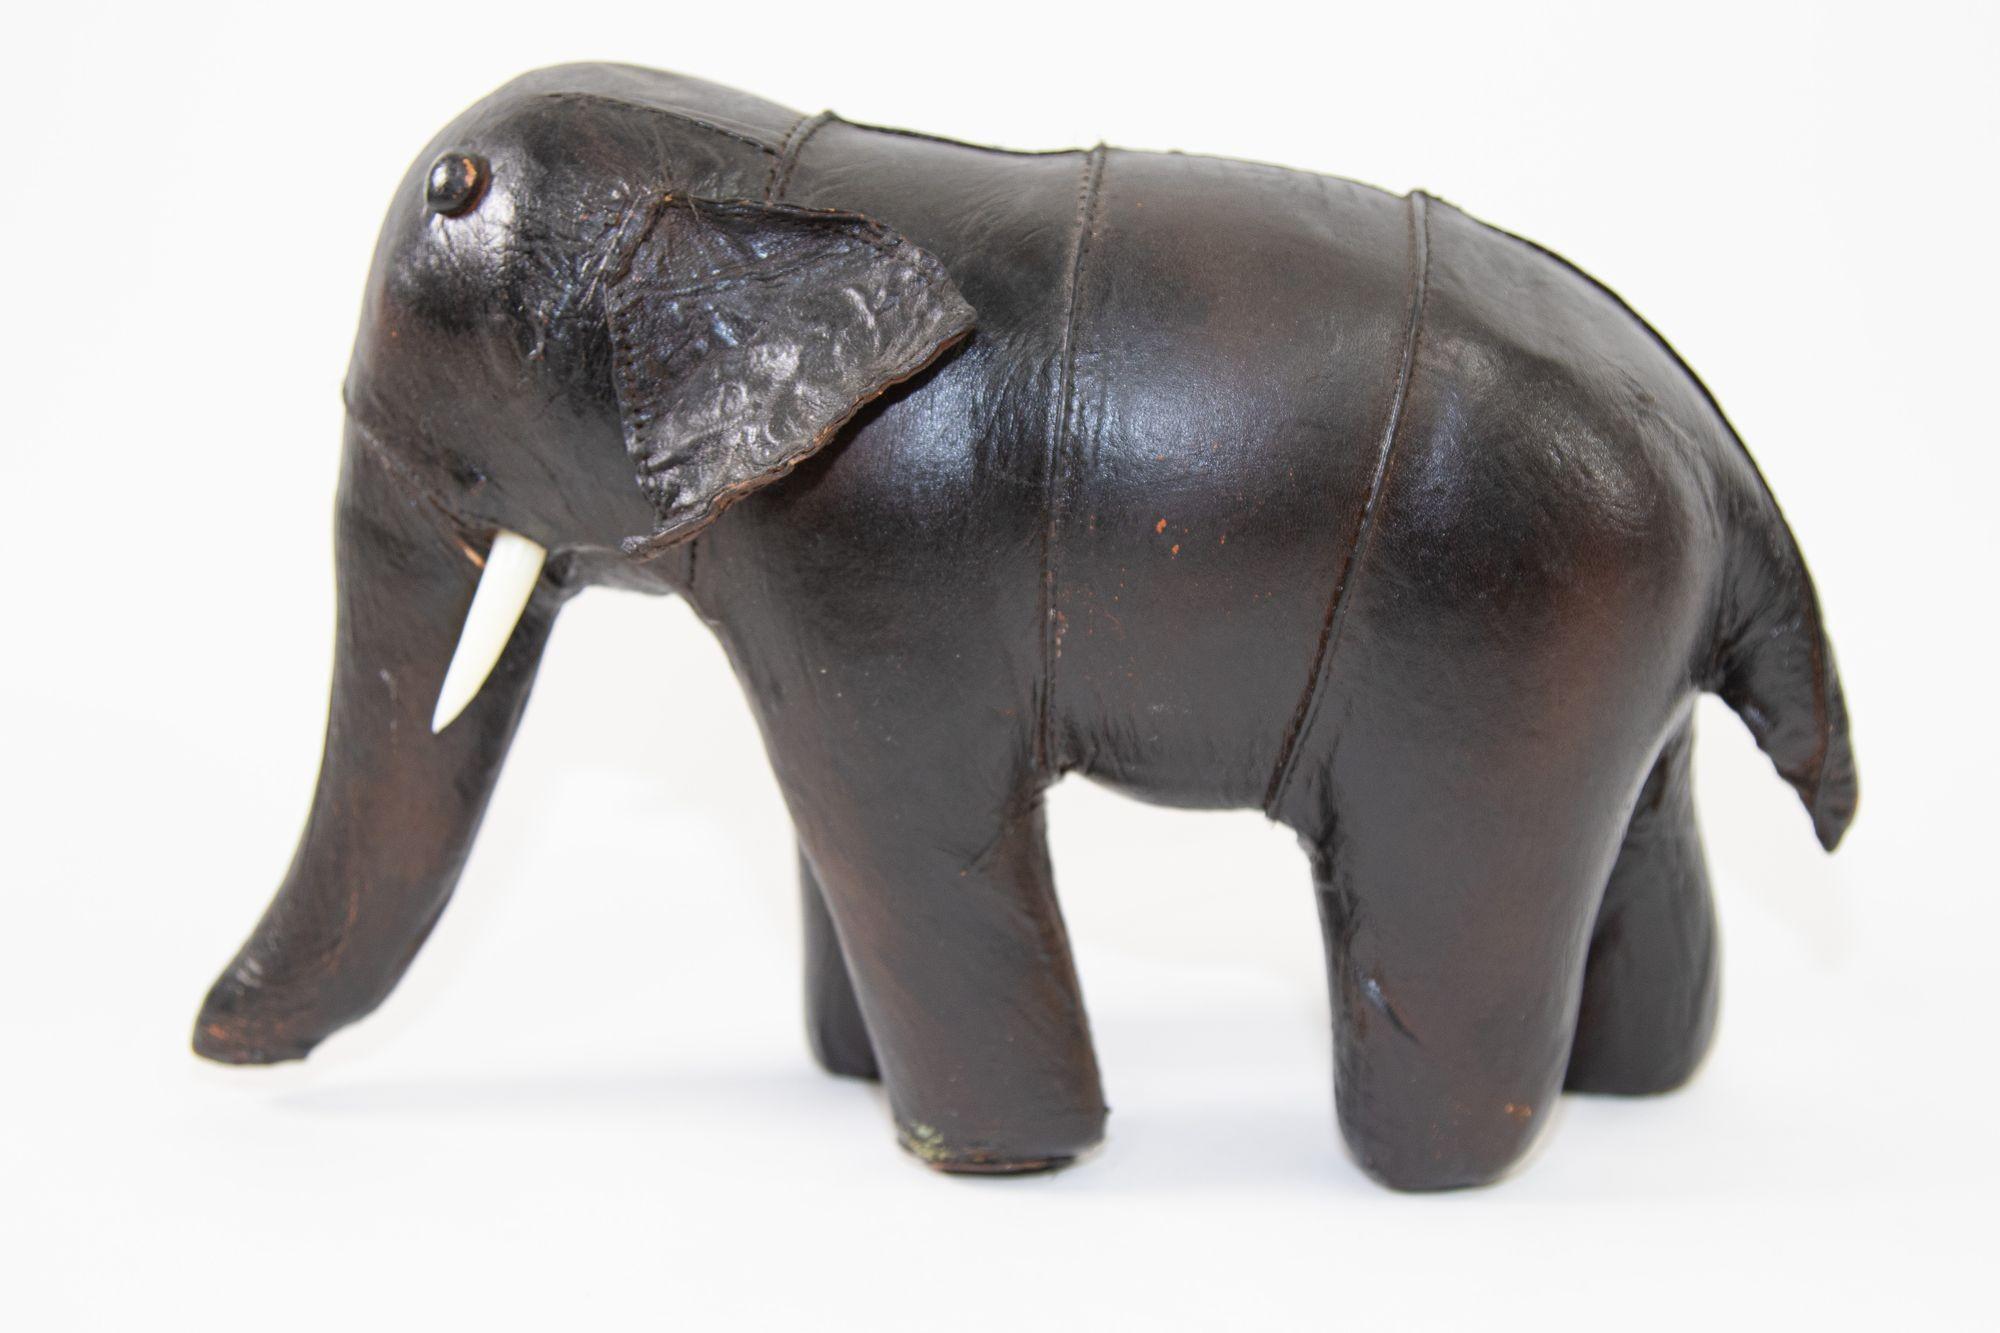 Hand-sewn black leather stuffed elephant figurine toy.
He will make a wonderful gift for anyone who loves elephants.
In the style of Dimitri Omersa's for Abercrombie and Fitch and Liberty England.
Unmarked, origin and designer unknown.
Circa